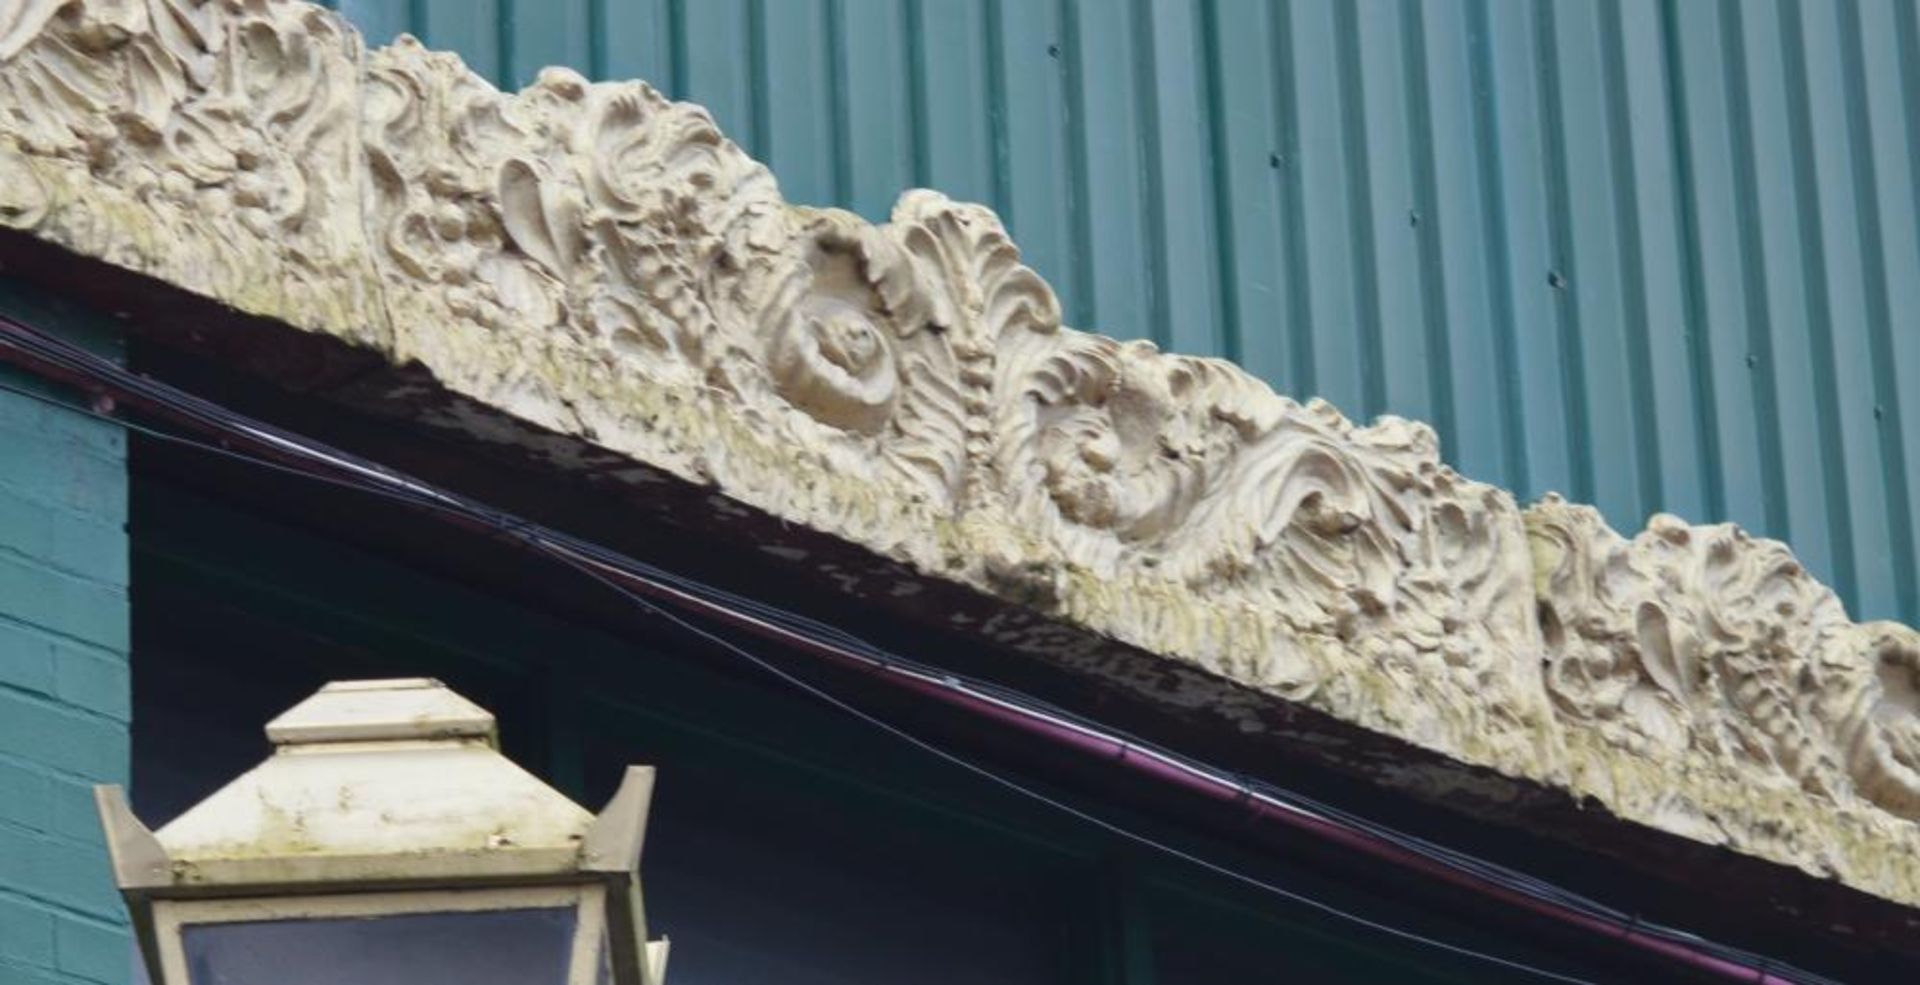 1 x Large Collection of Ornate Paneling Finished in Gold - Approx Length of Building 100ft - BB000 O